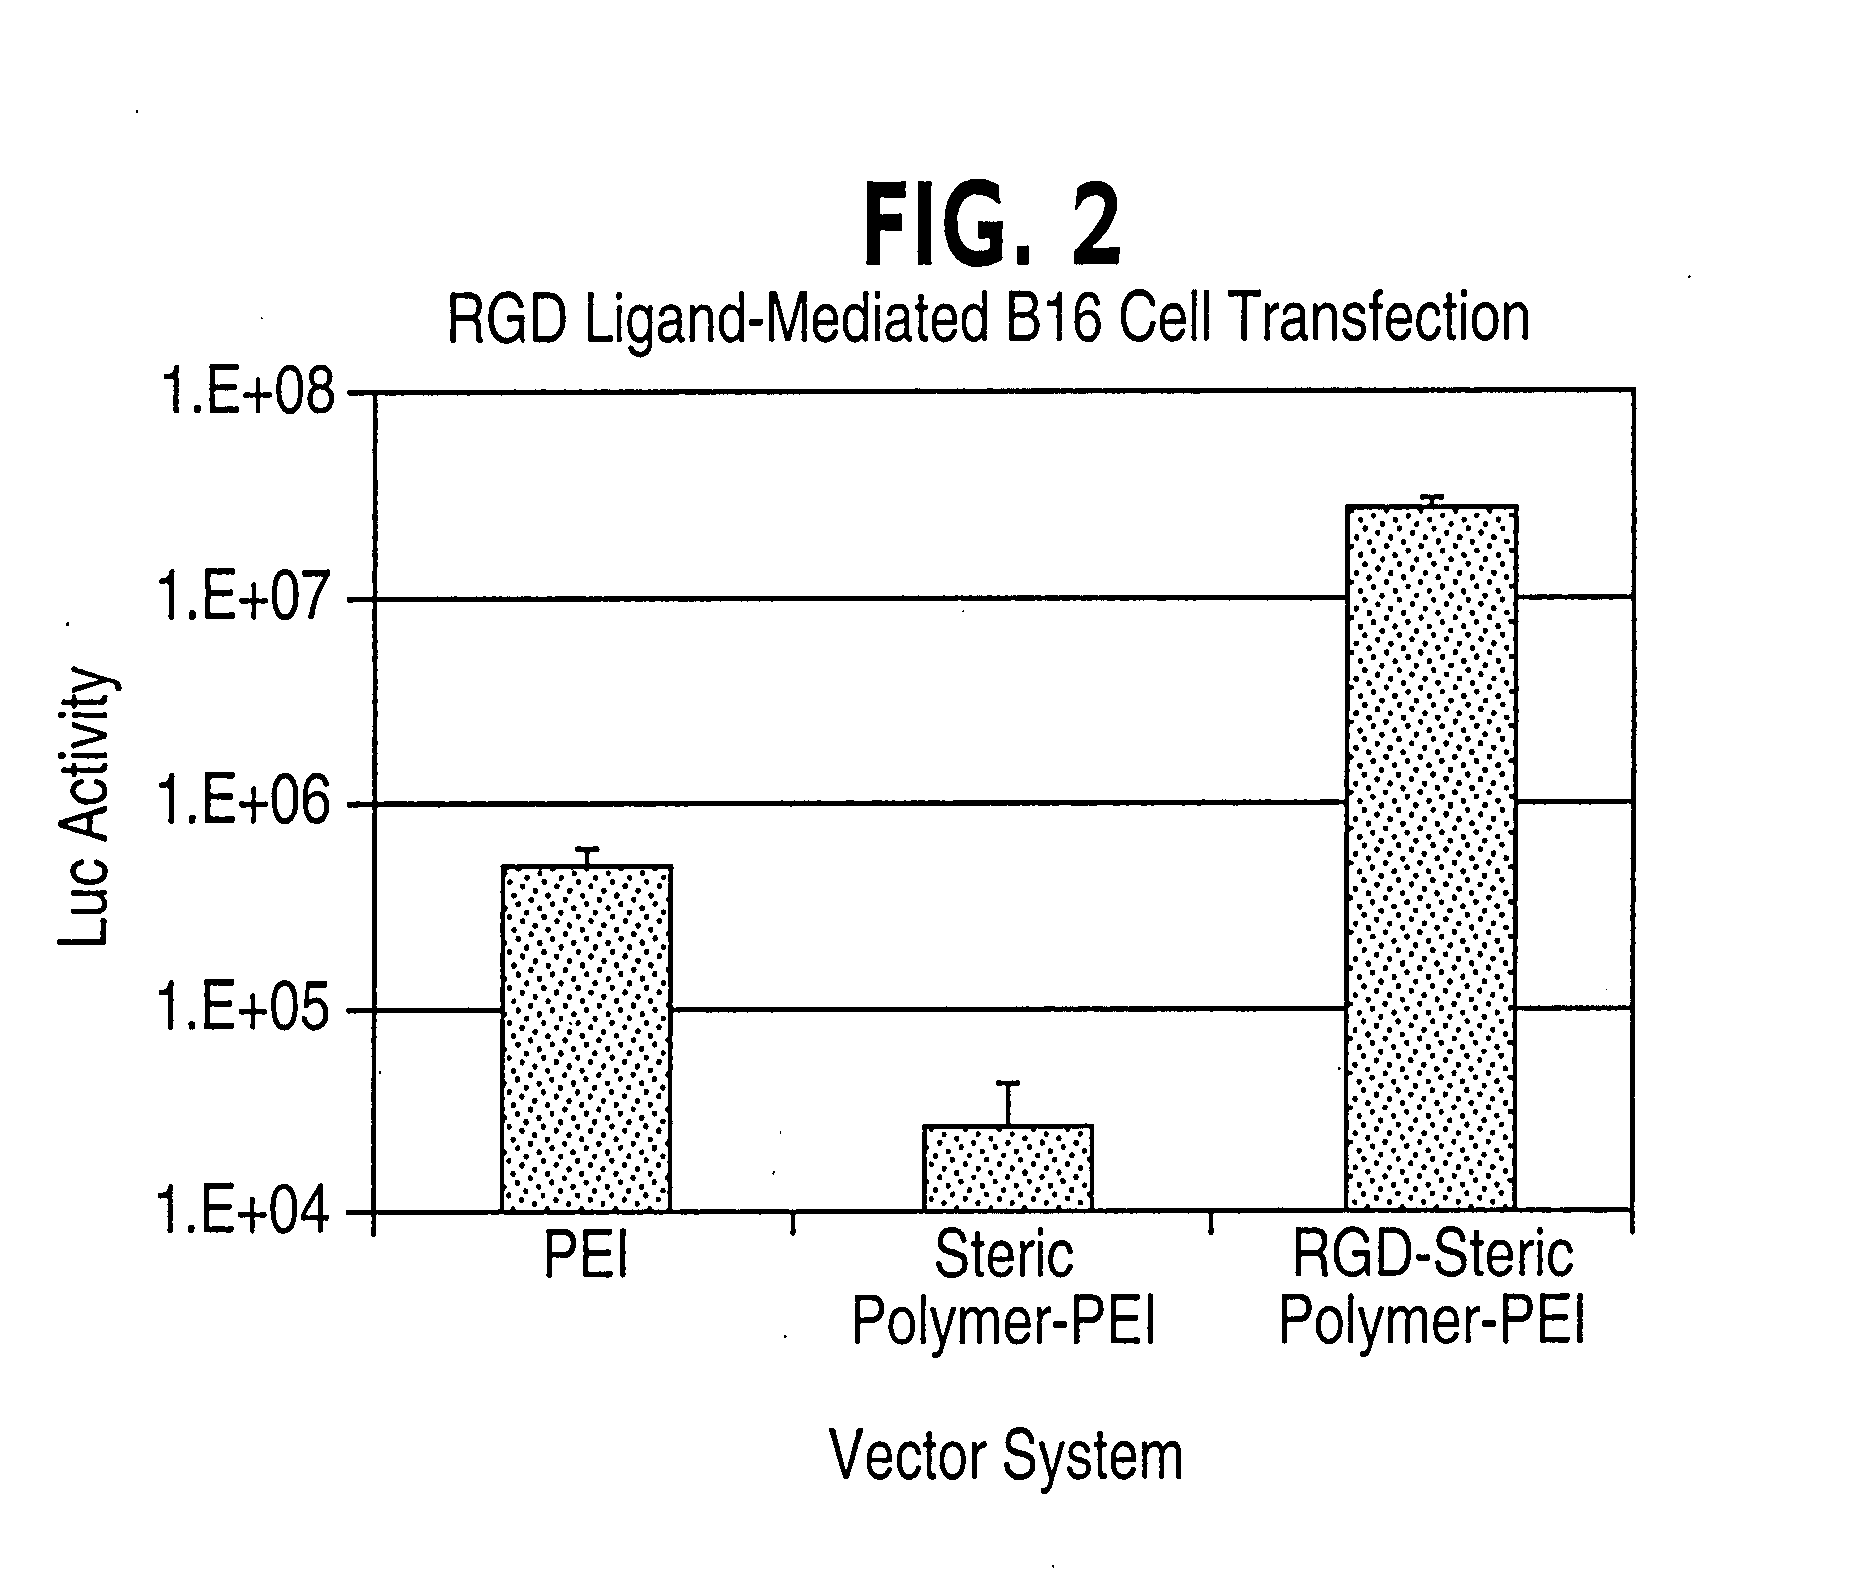 Therapeutic methods for nucleic acid delivery vehicles